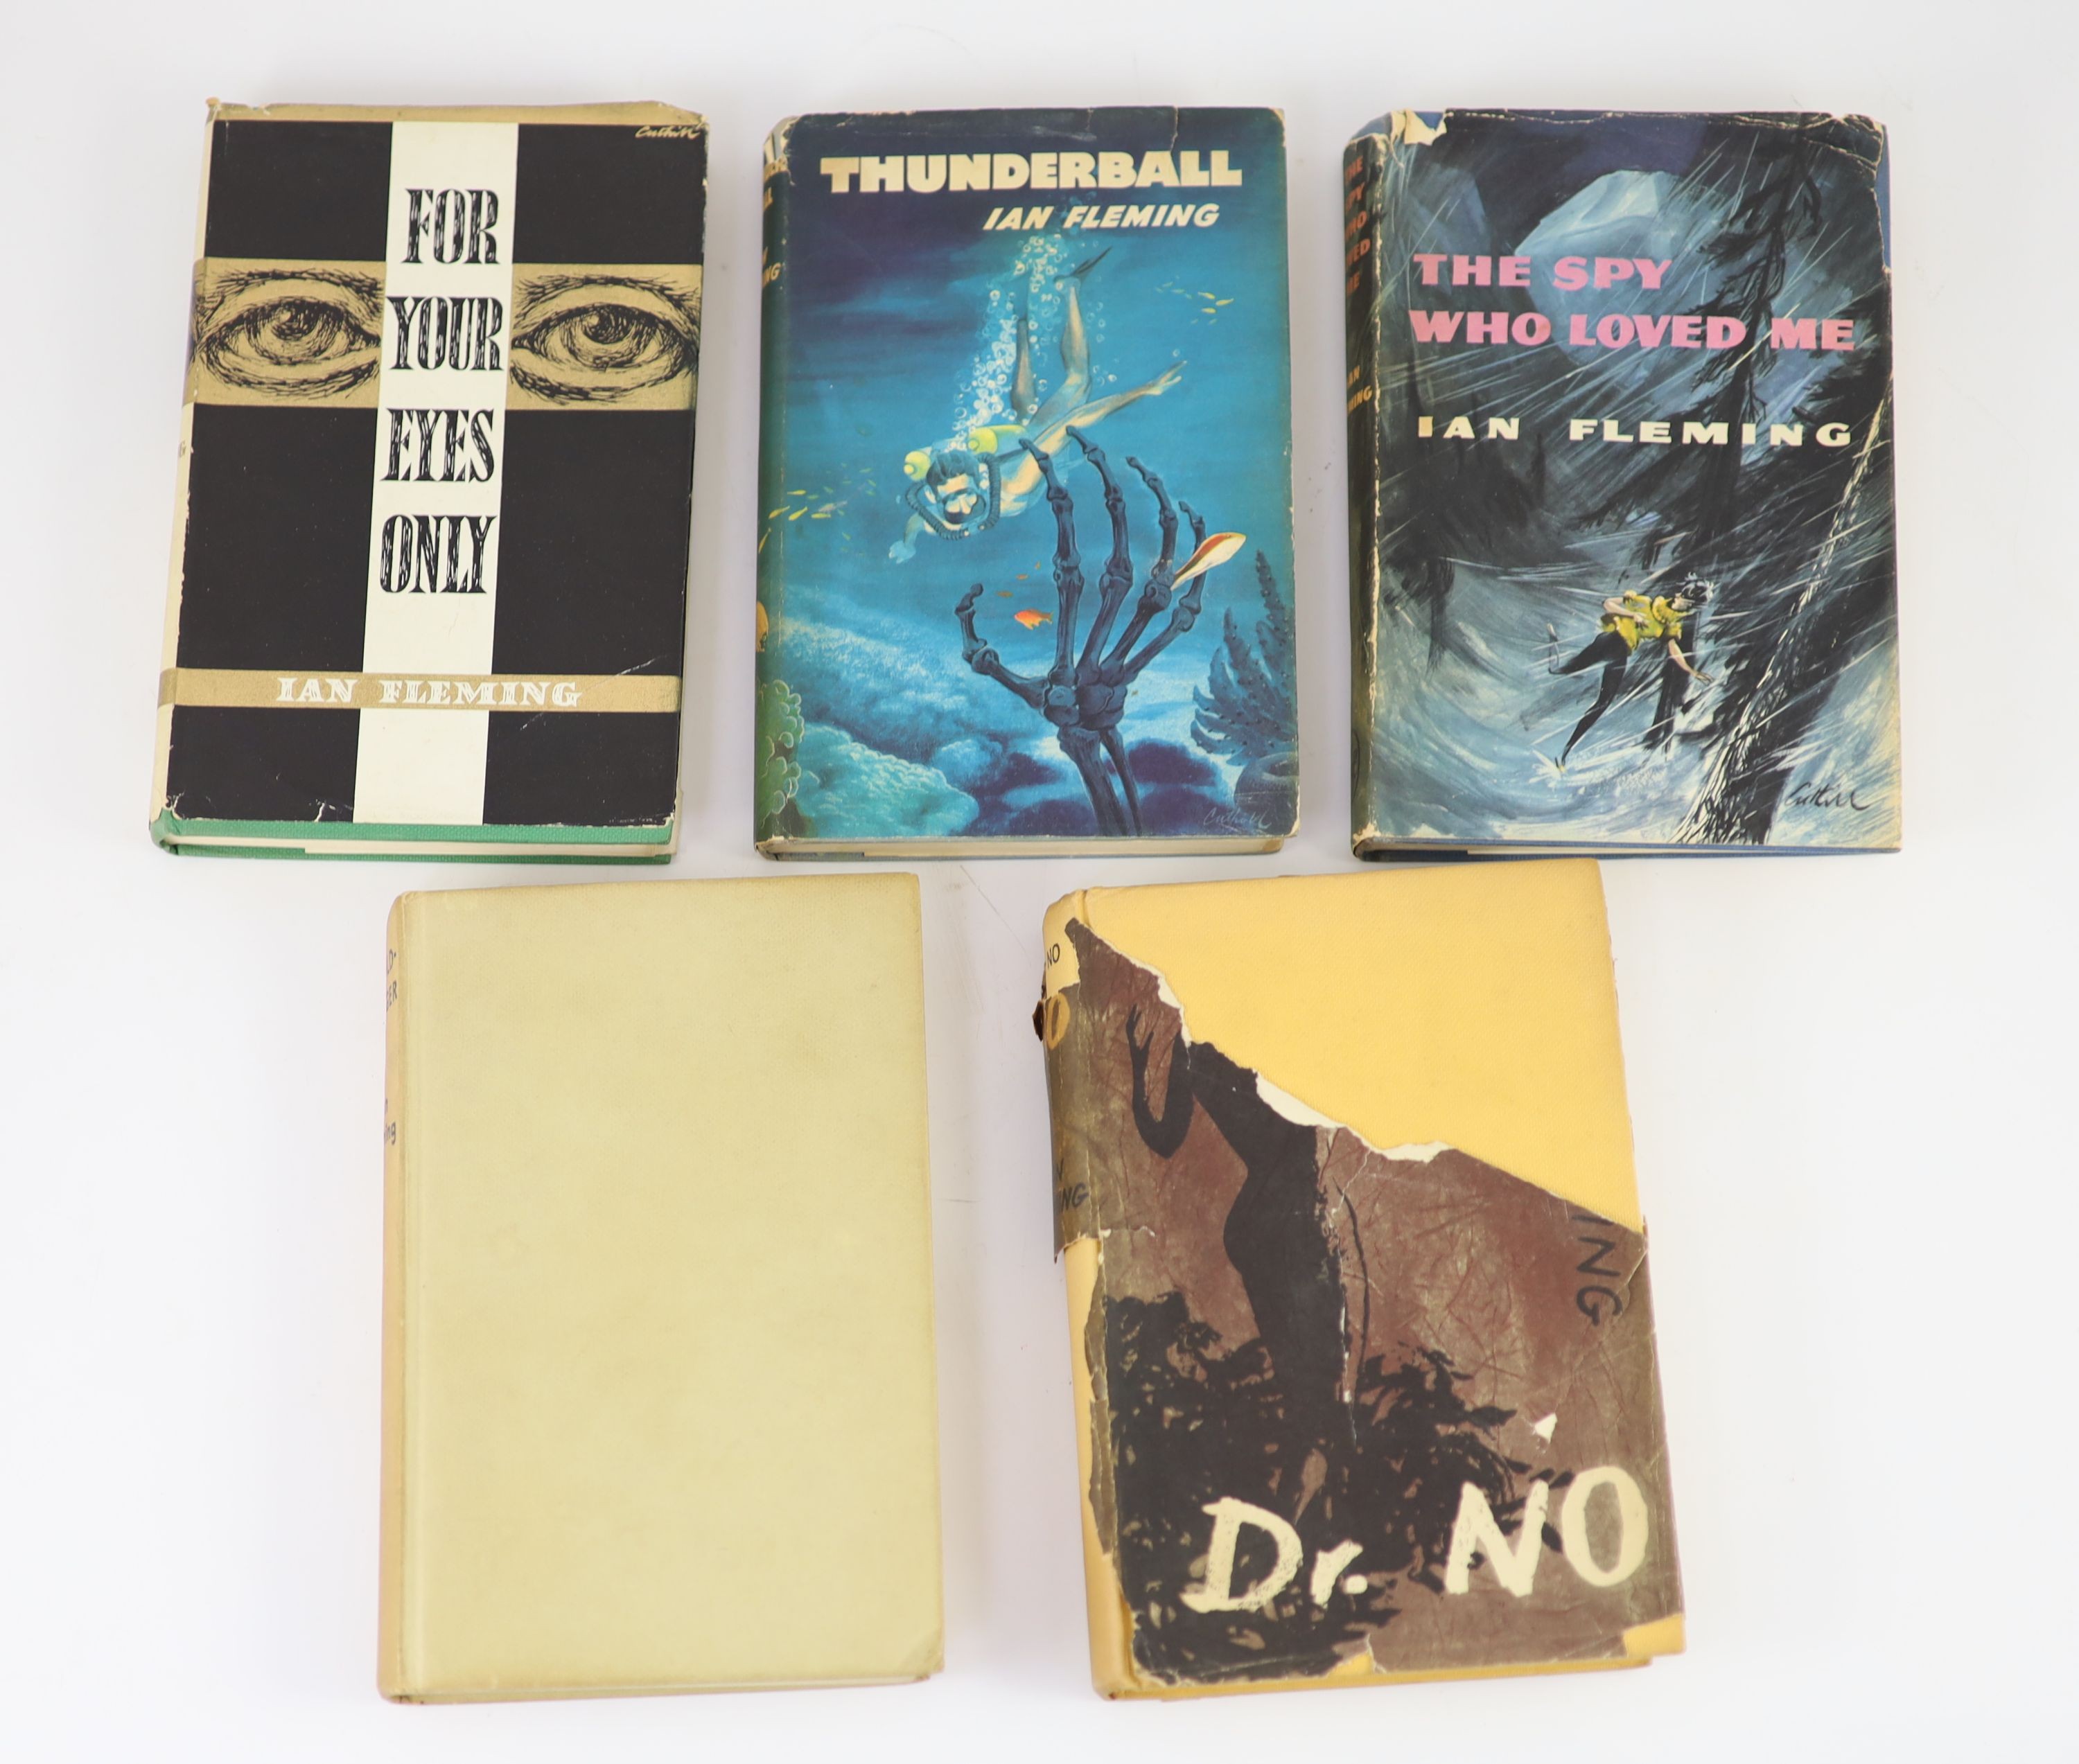 Fleming, Ian - 5 Book Club editions - Dr. No, with ragged, incomplete d/j, 1958; For Your Eyes Only, with unclipped d/j, 1960; Thunderball, with unclipped d/j, 1961; The Spy Who Loved Me, with unclipped d/j, 1962 and Gol